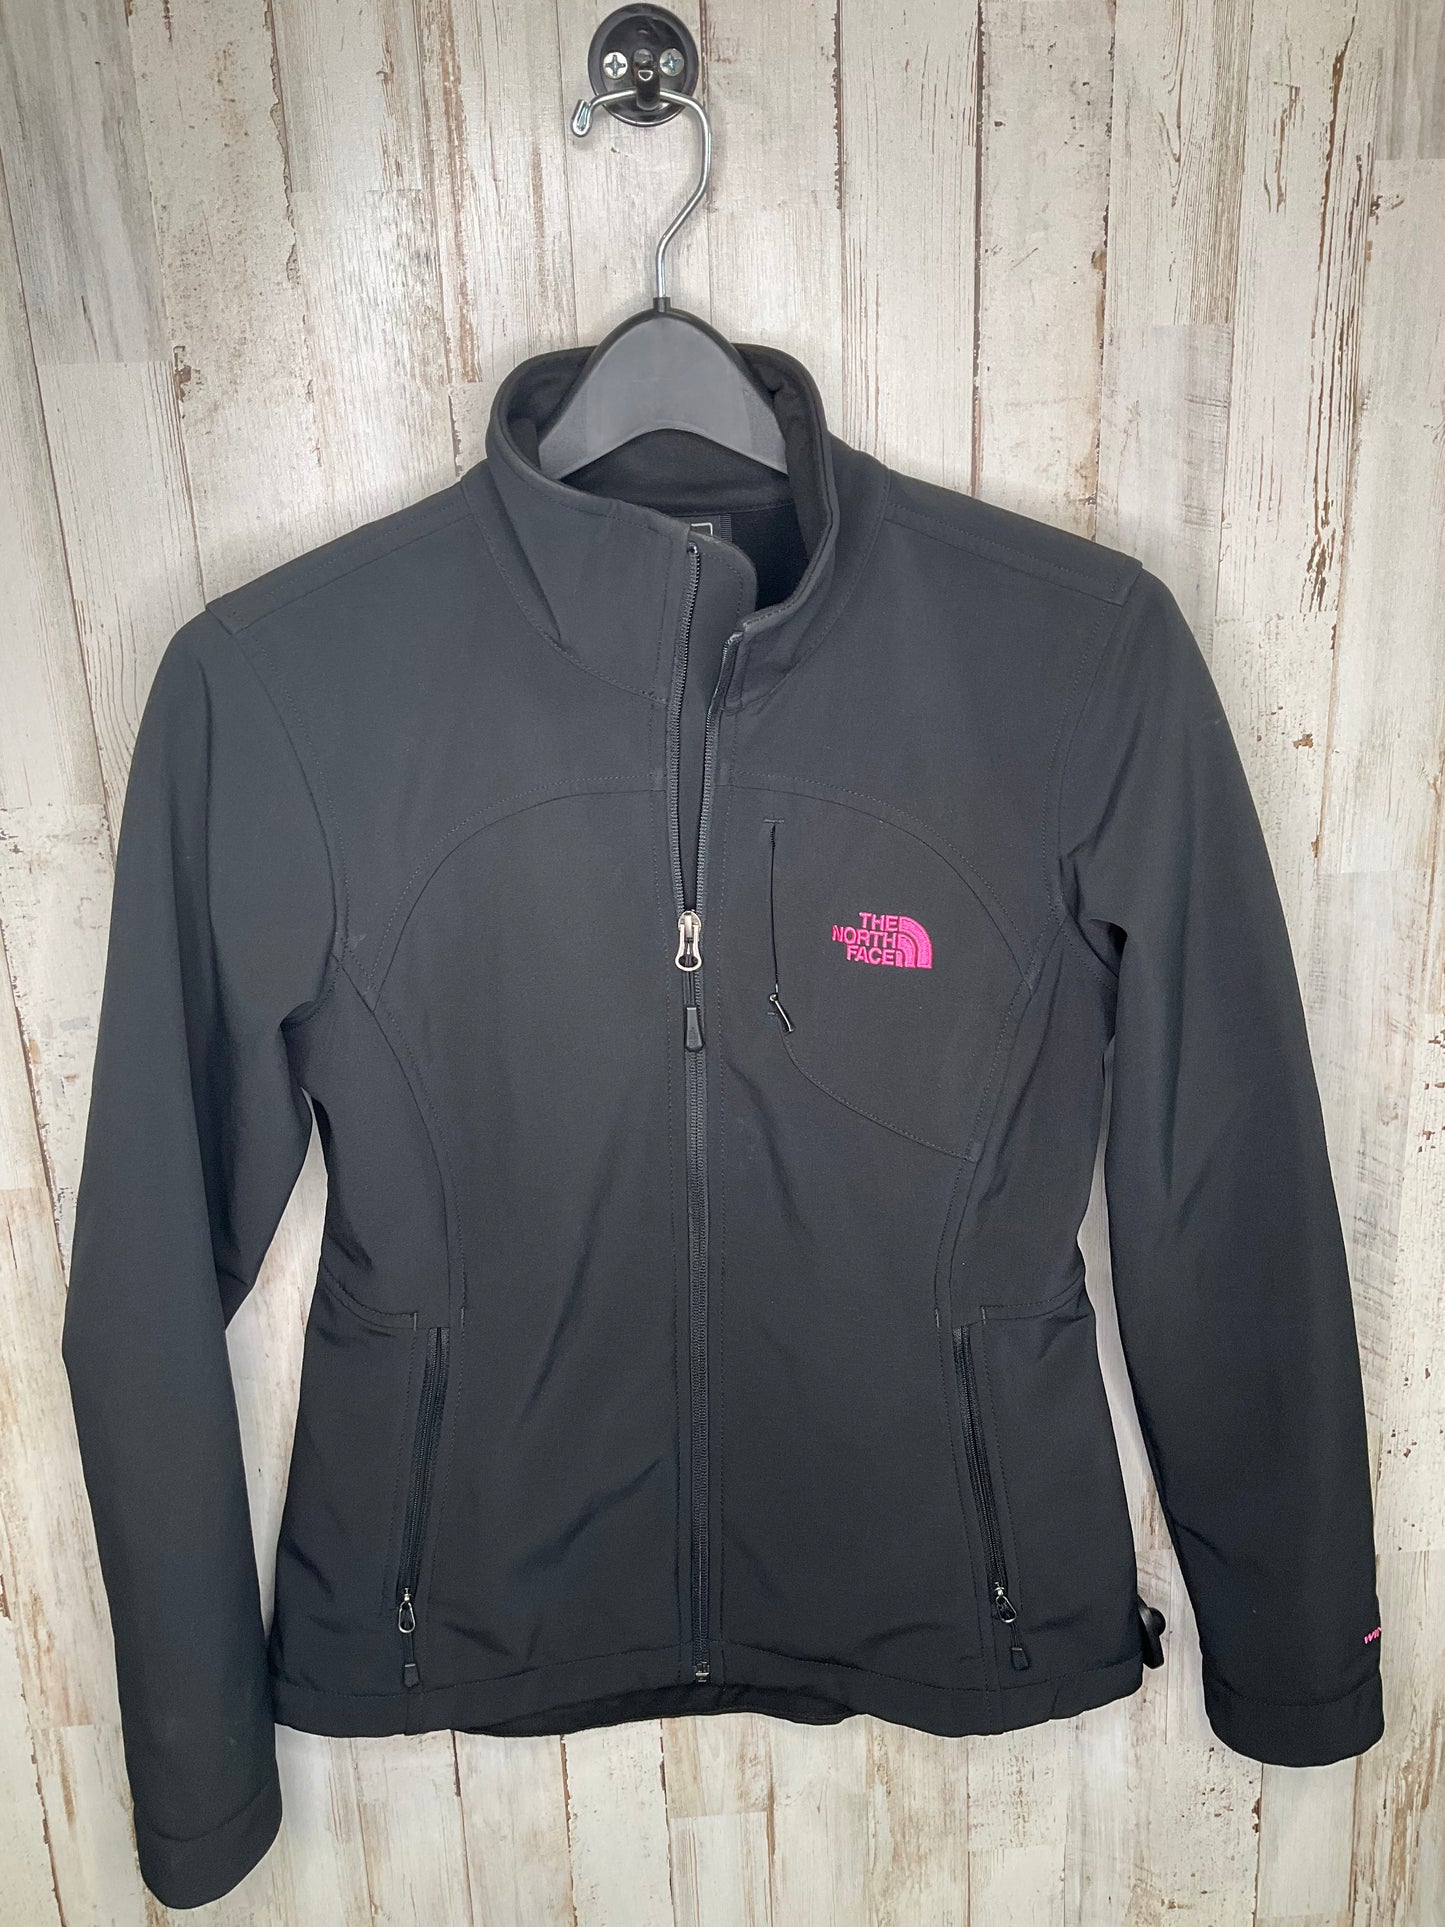 Jacket Other By North Face  Size: S